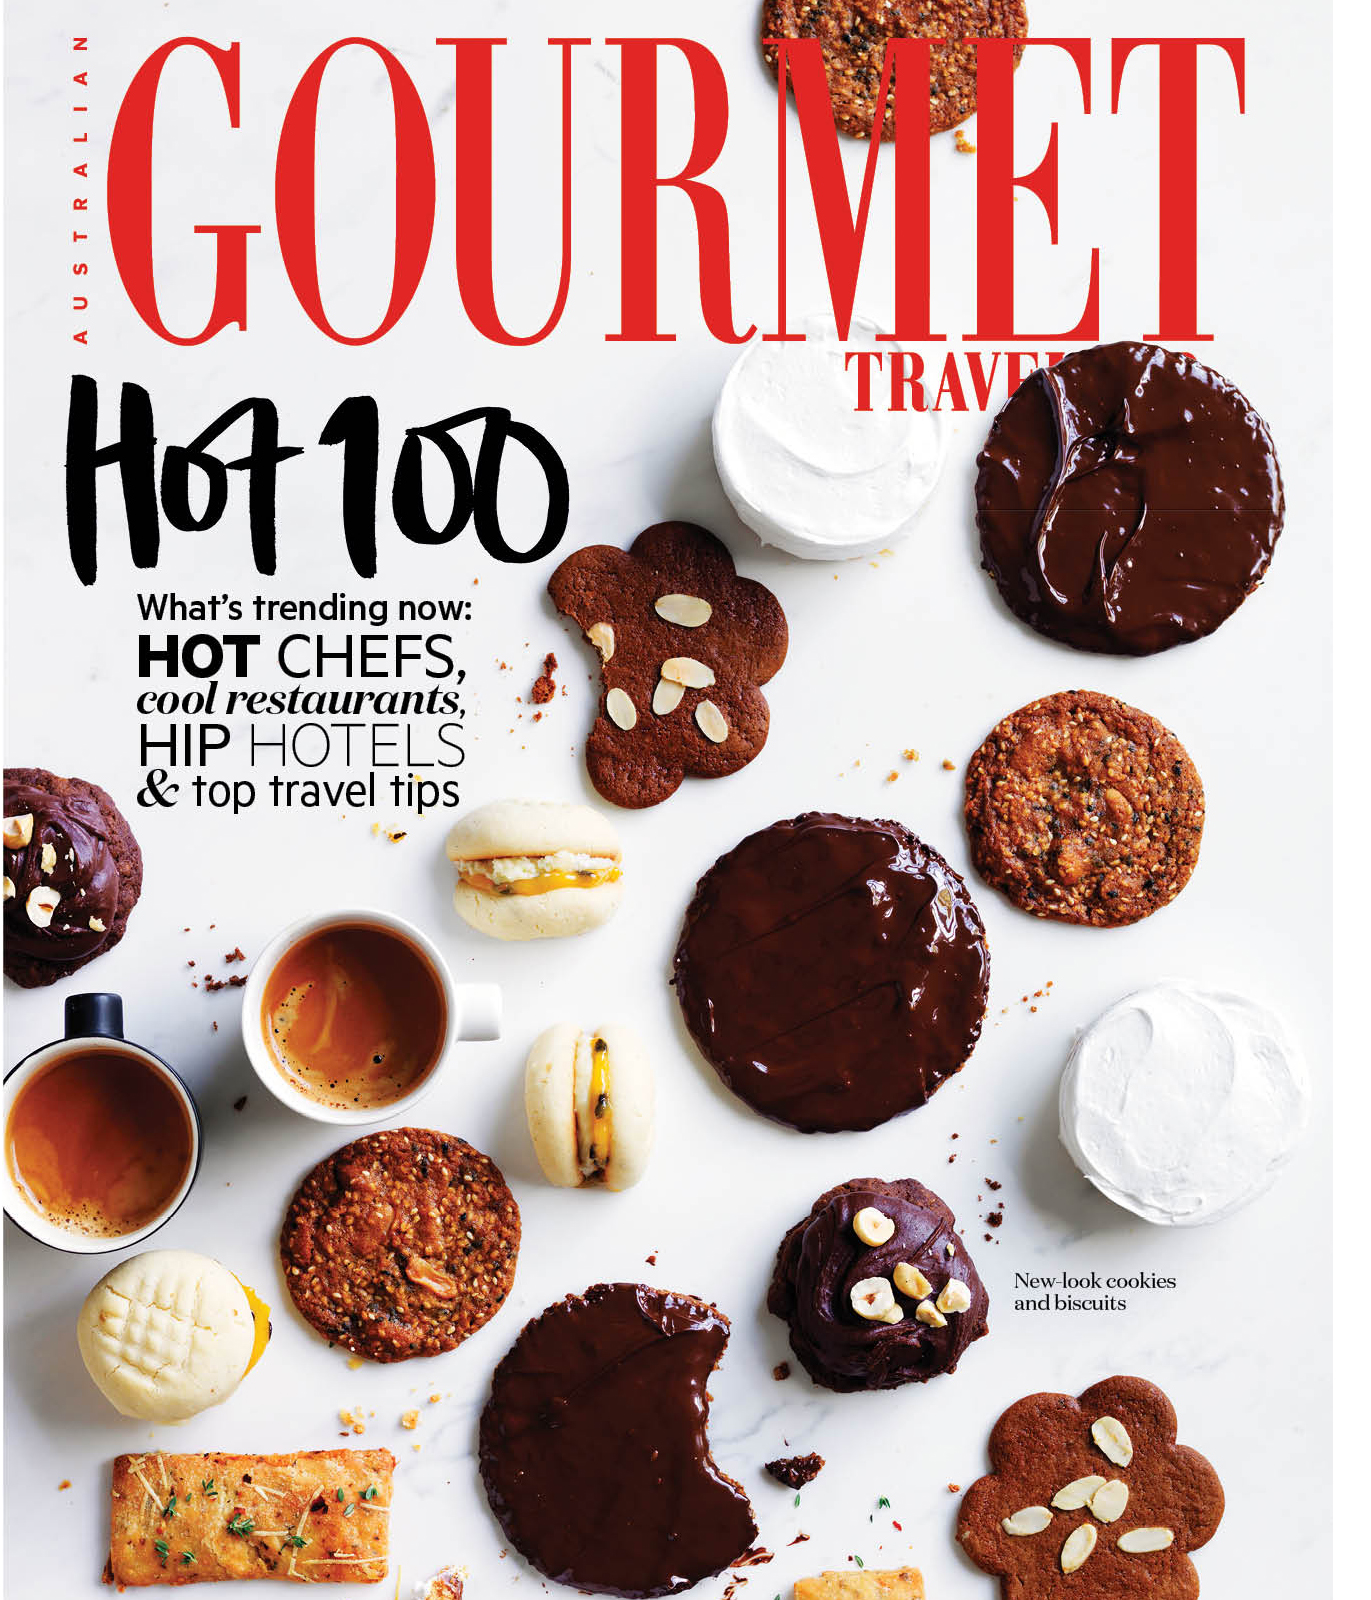 Our Hot 100 issue is out now